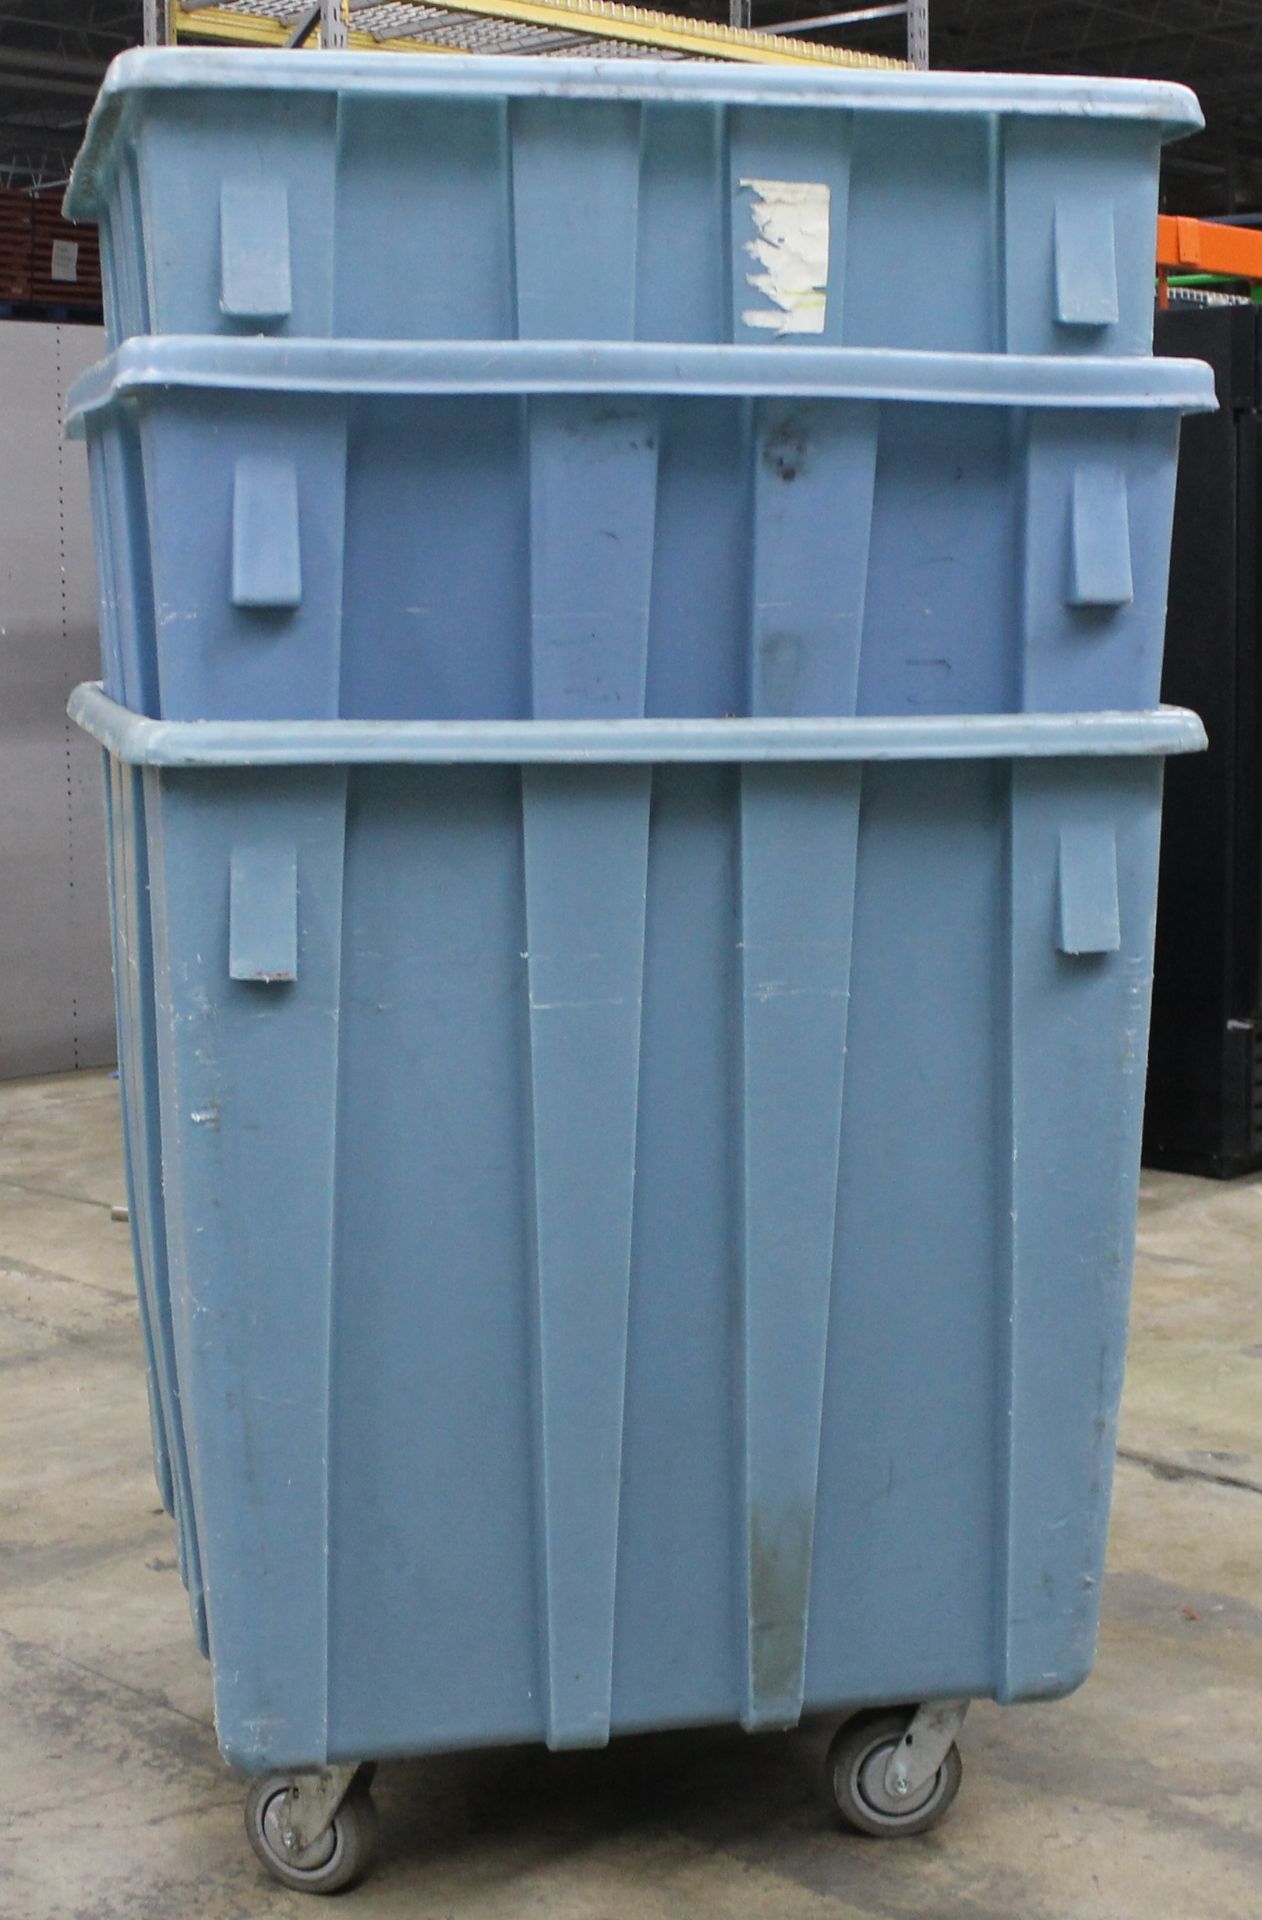 3 PCS OF USED PLASTIC ROLLING TRASH CONTAINER